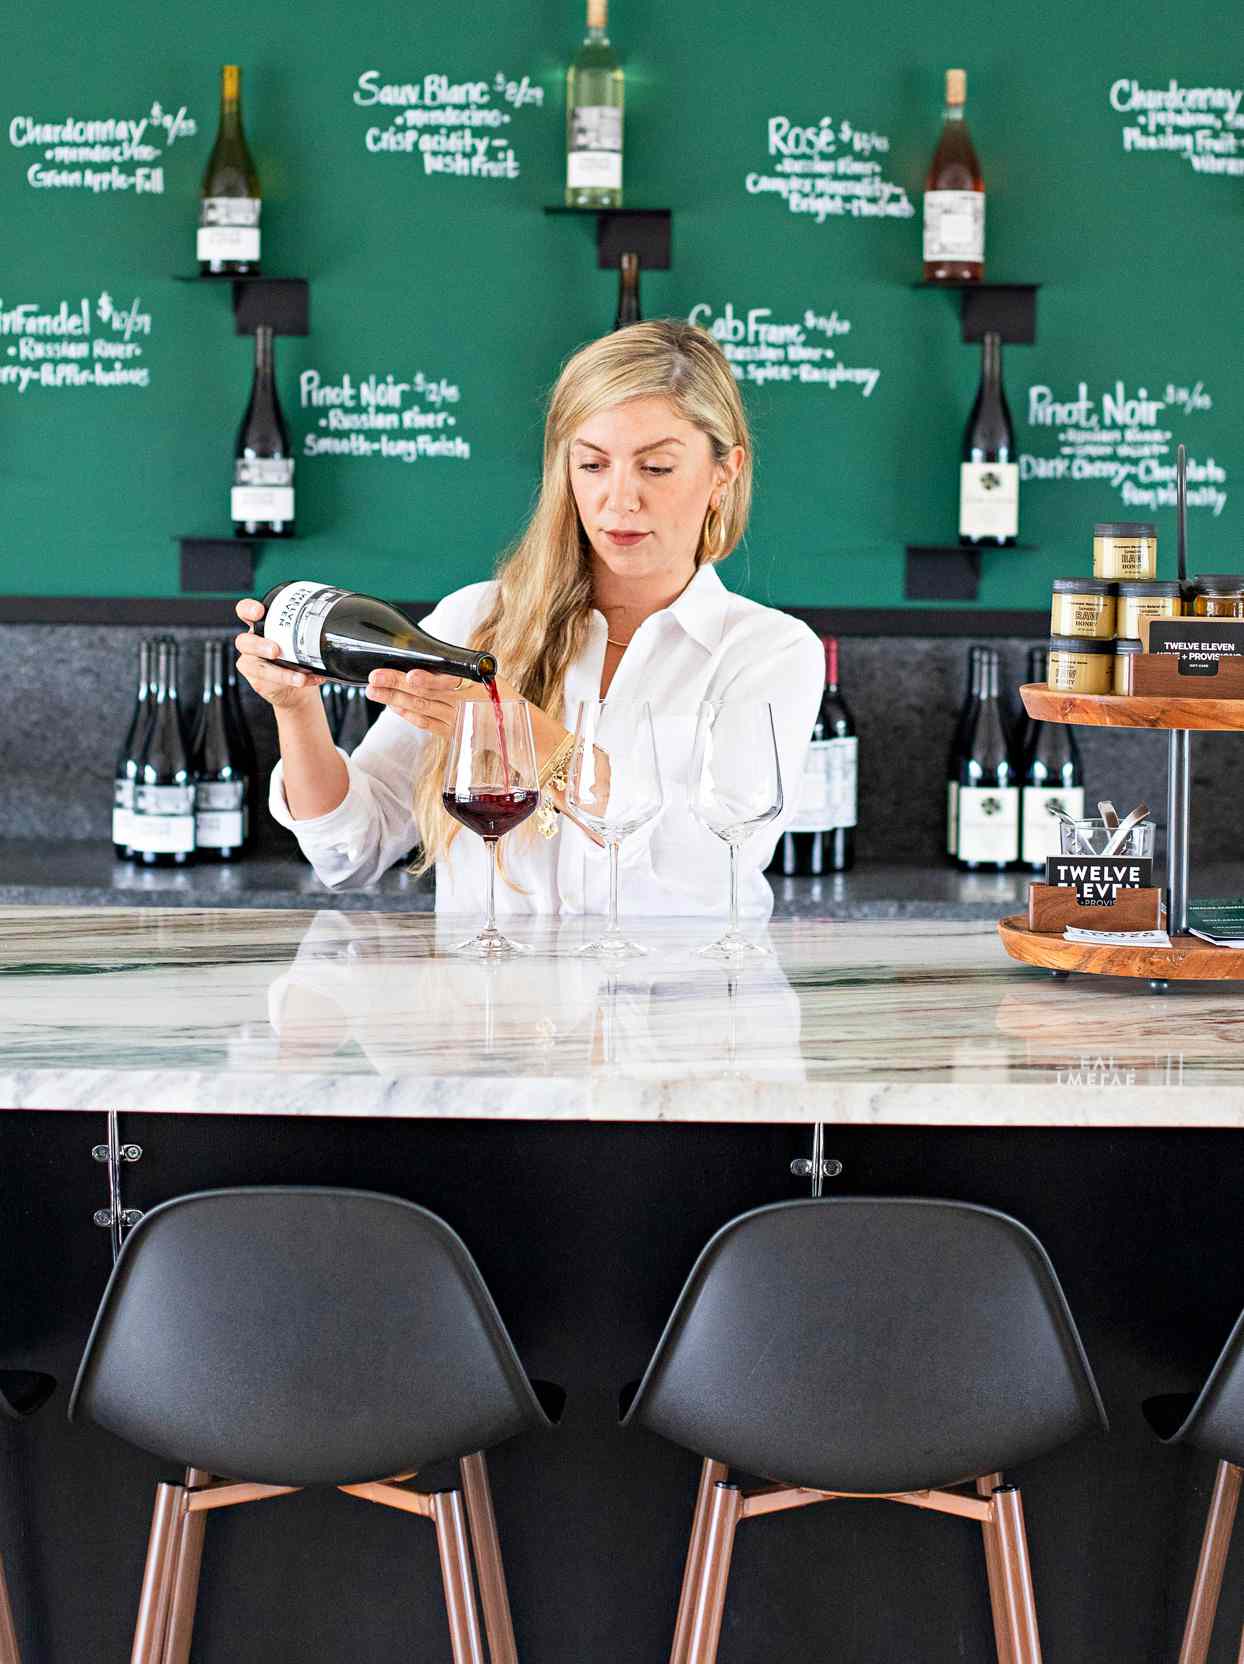 pouring wine at bar